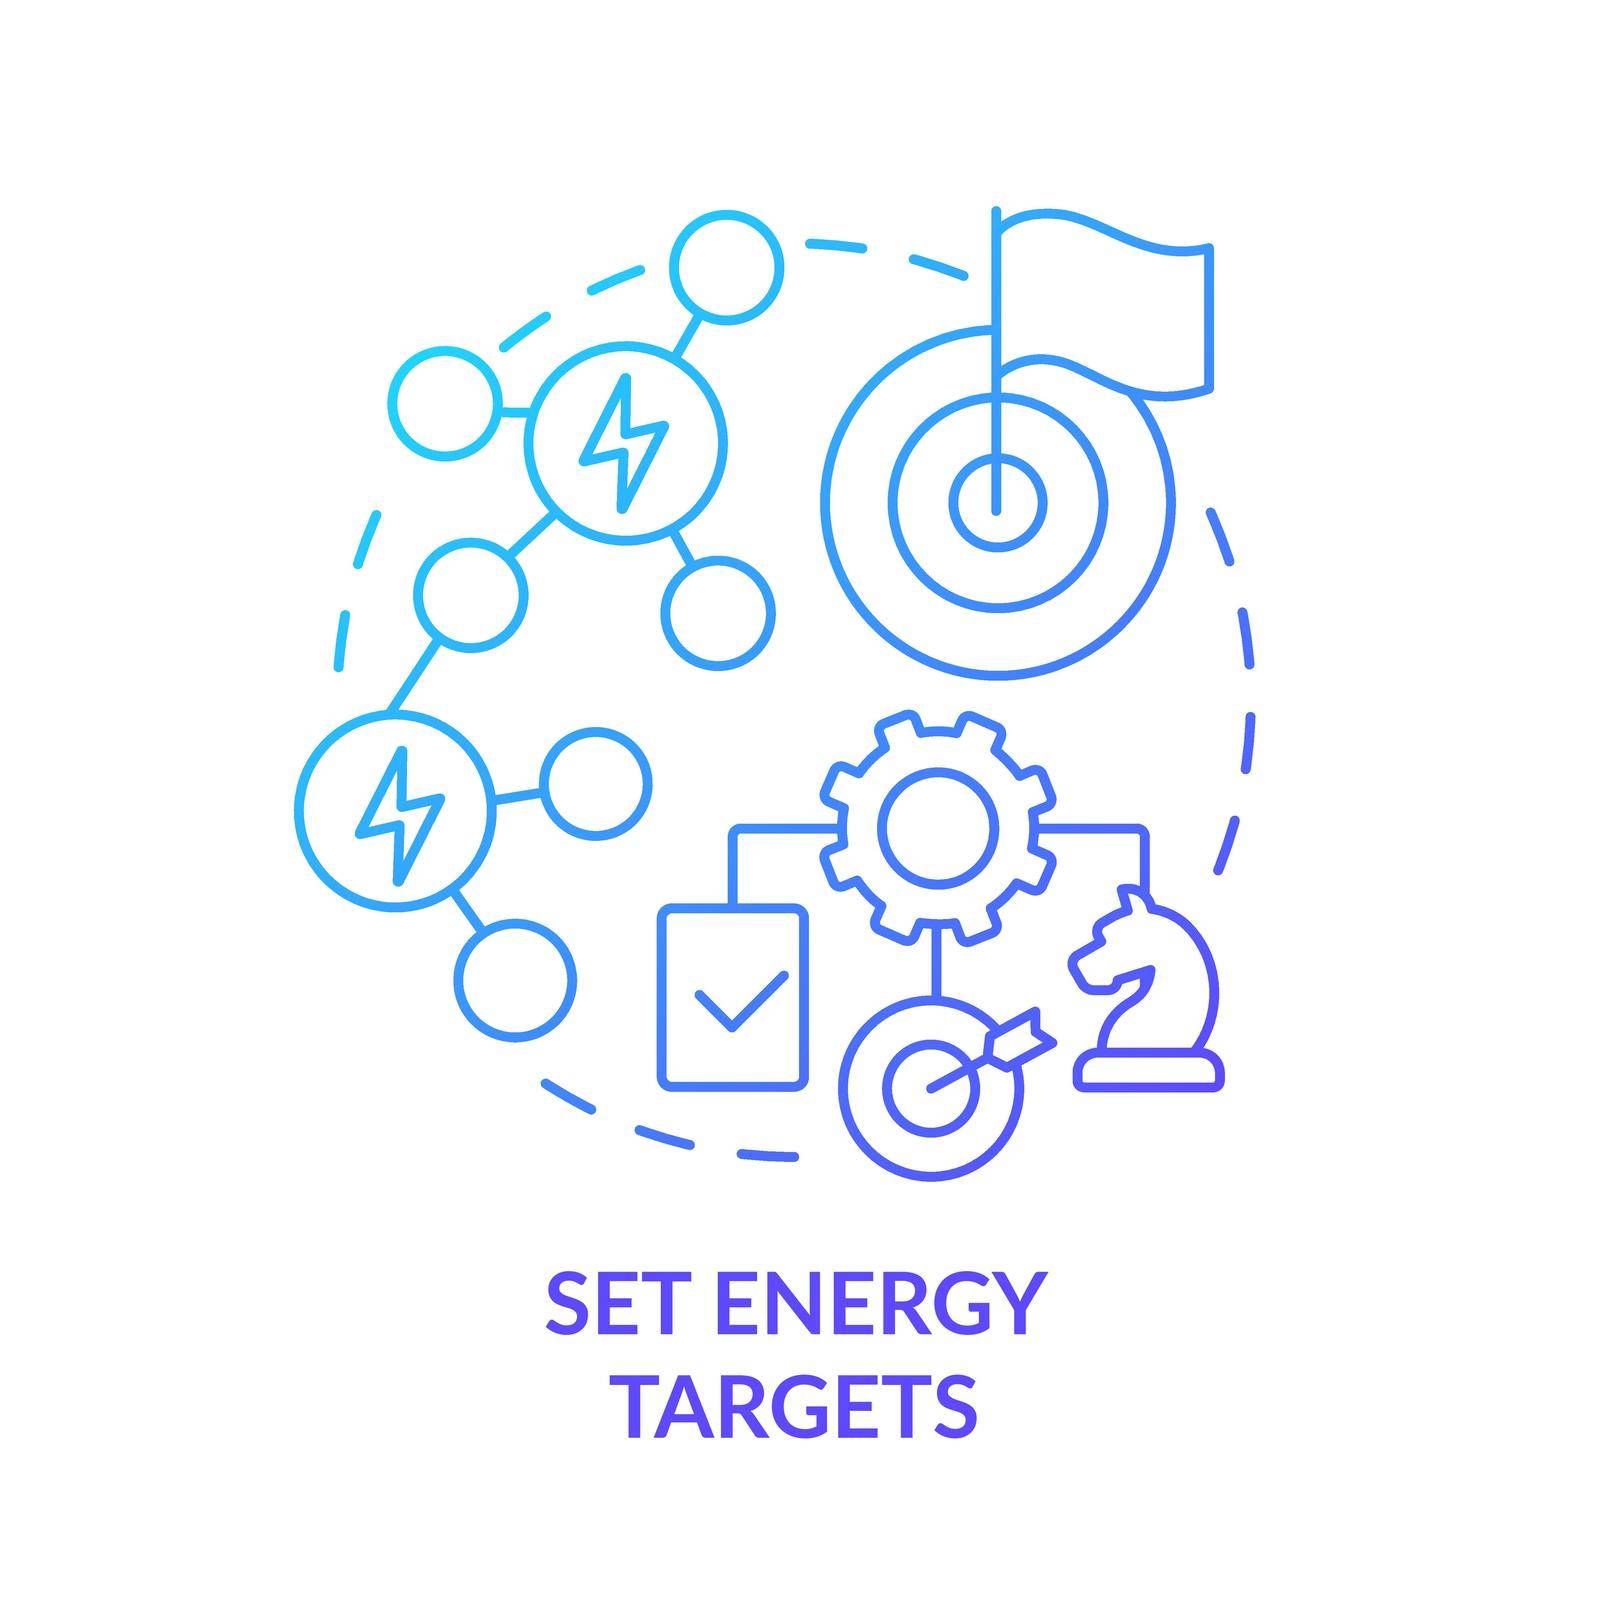 Set energy targets blue gradient concept icon by bsd